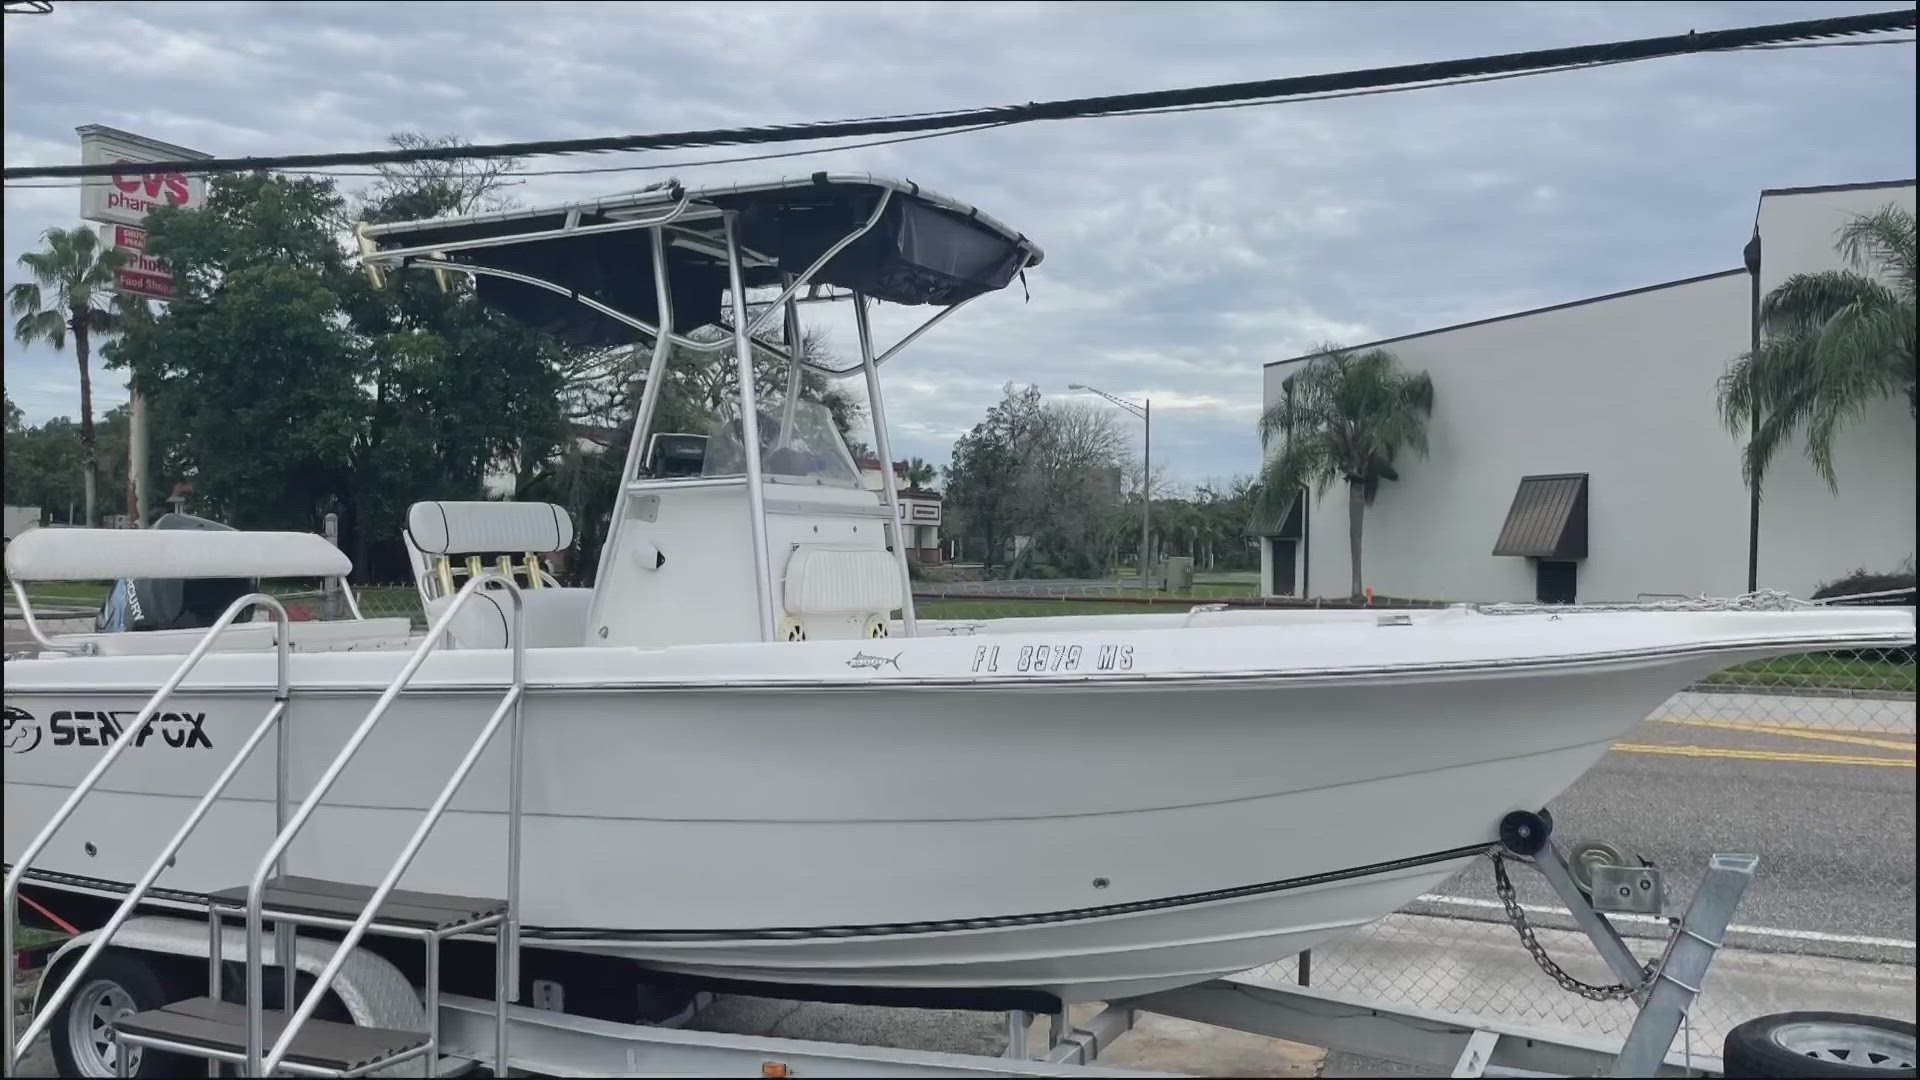 Dave and Vanessa Robbins were the owners of a 2004 Sea Fox boat. Last year, they decided to sell it. The Robbins turned to Discount Boats of Jacksonville for help.